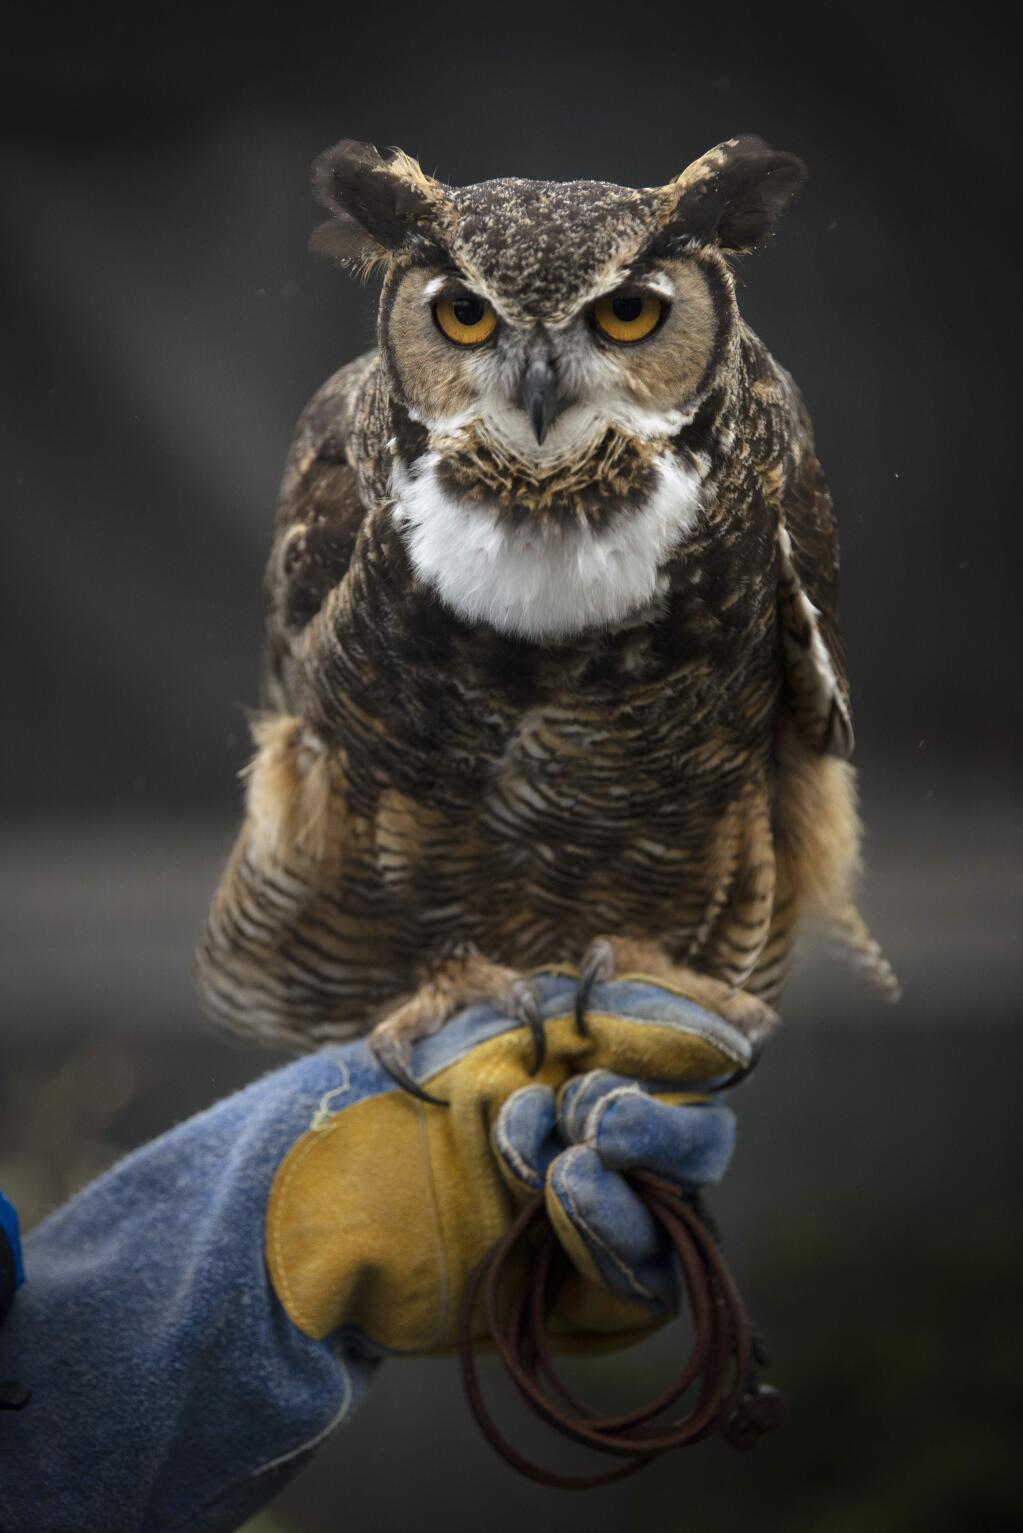 A great horned owl held by raptor handler-in-training Wendy Walsh during The Bird Rescue Center's monthly open house held Saturday in Santa Rosa, California. January 5, 2019. (Photo: Erik Castro/for The Press Democrat)